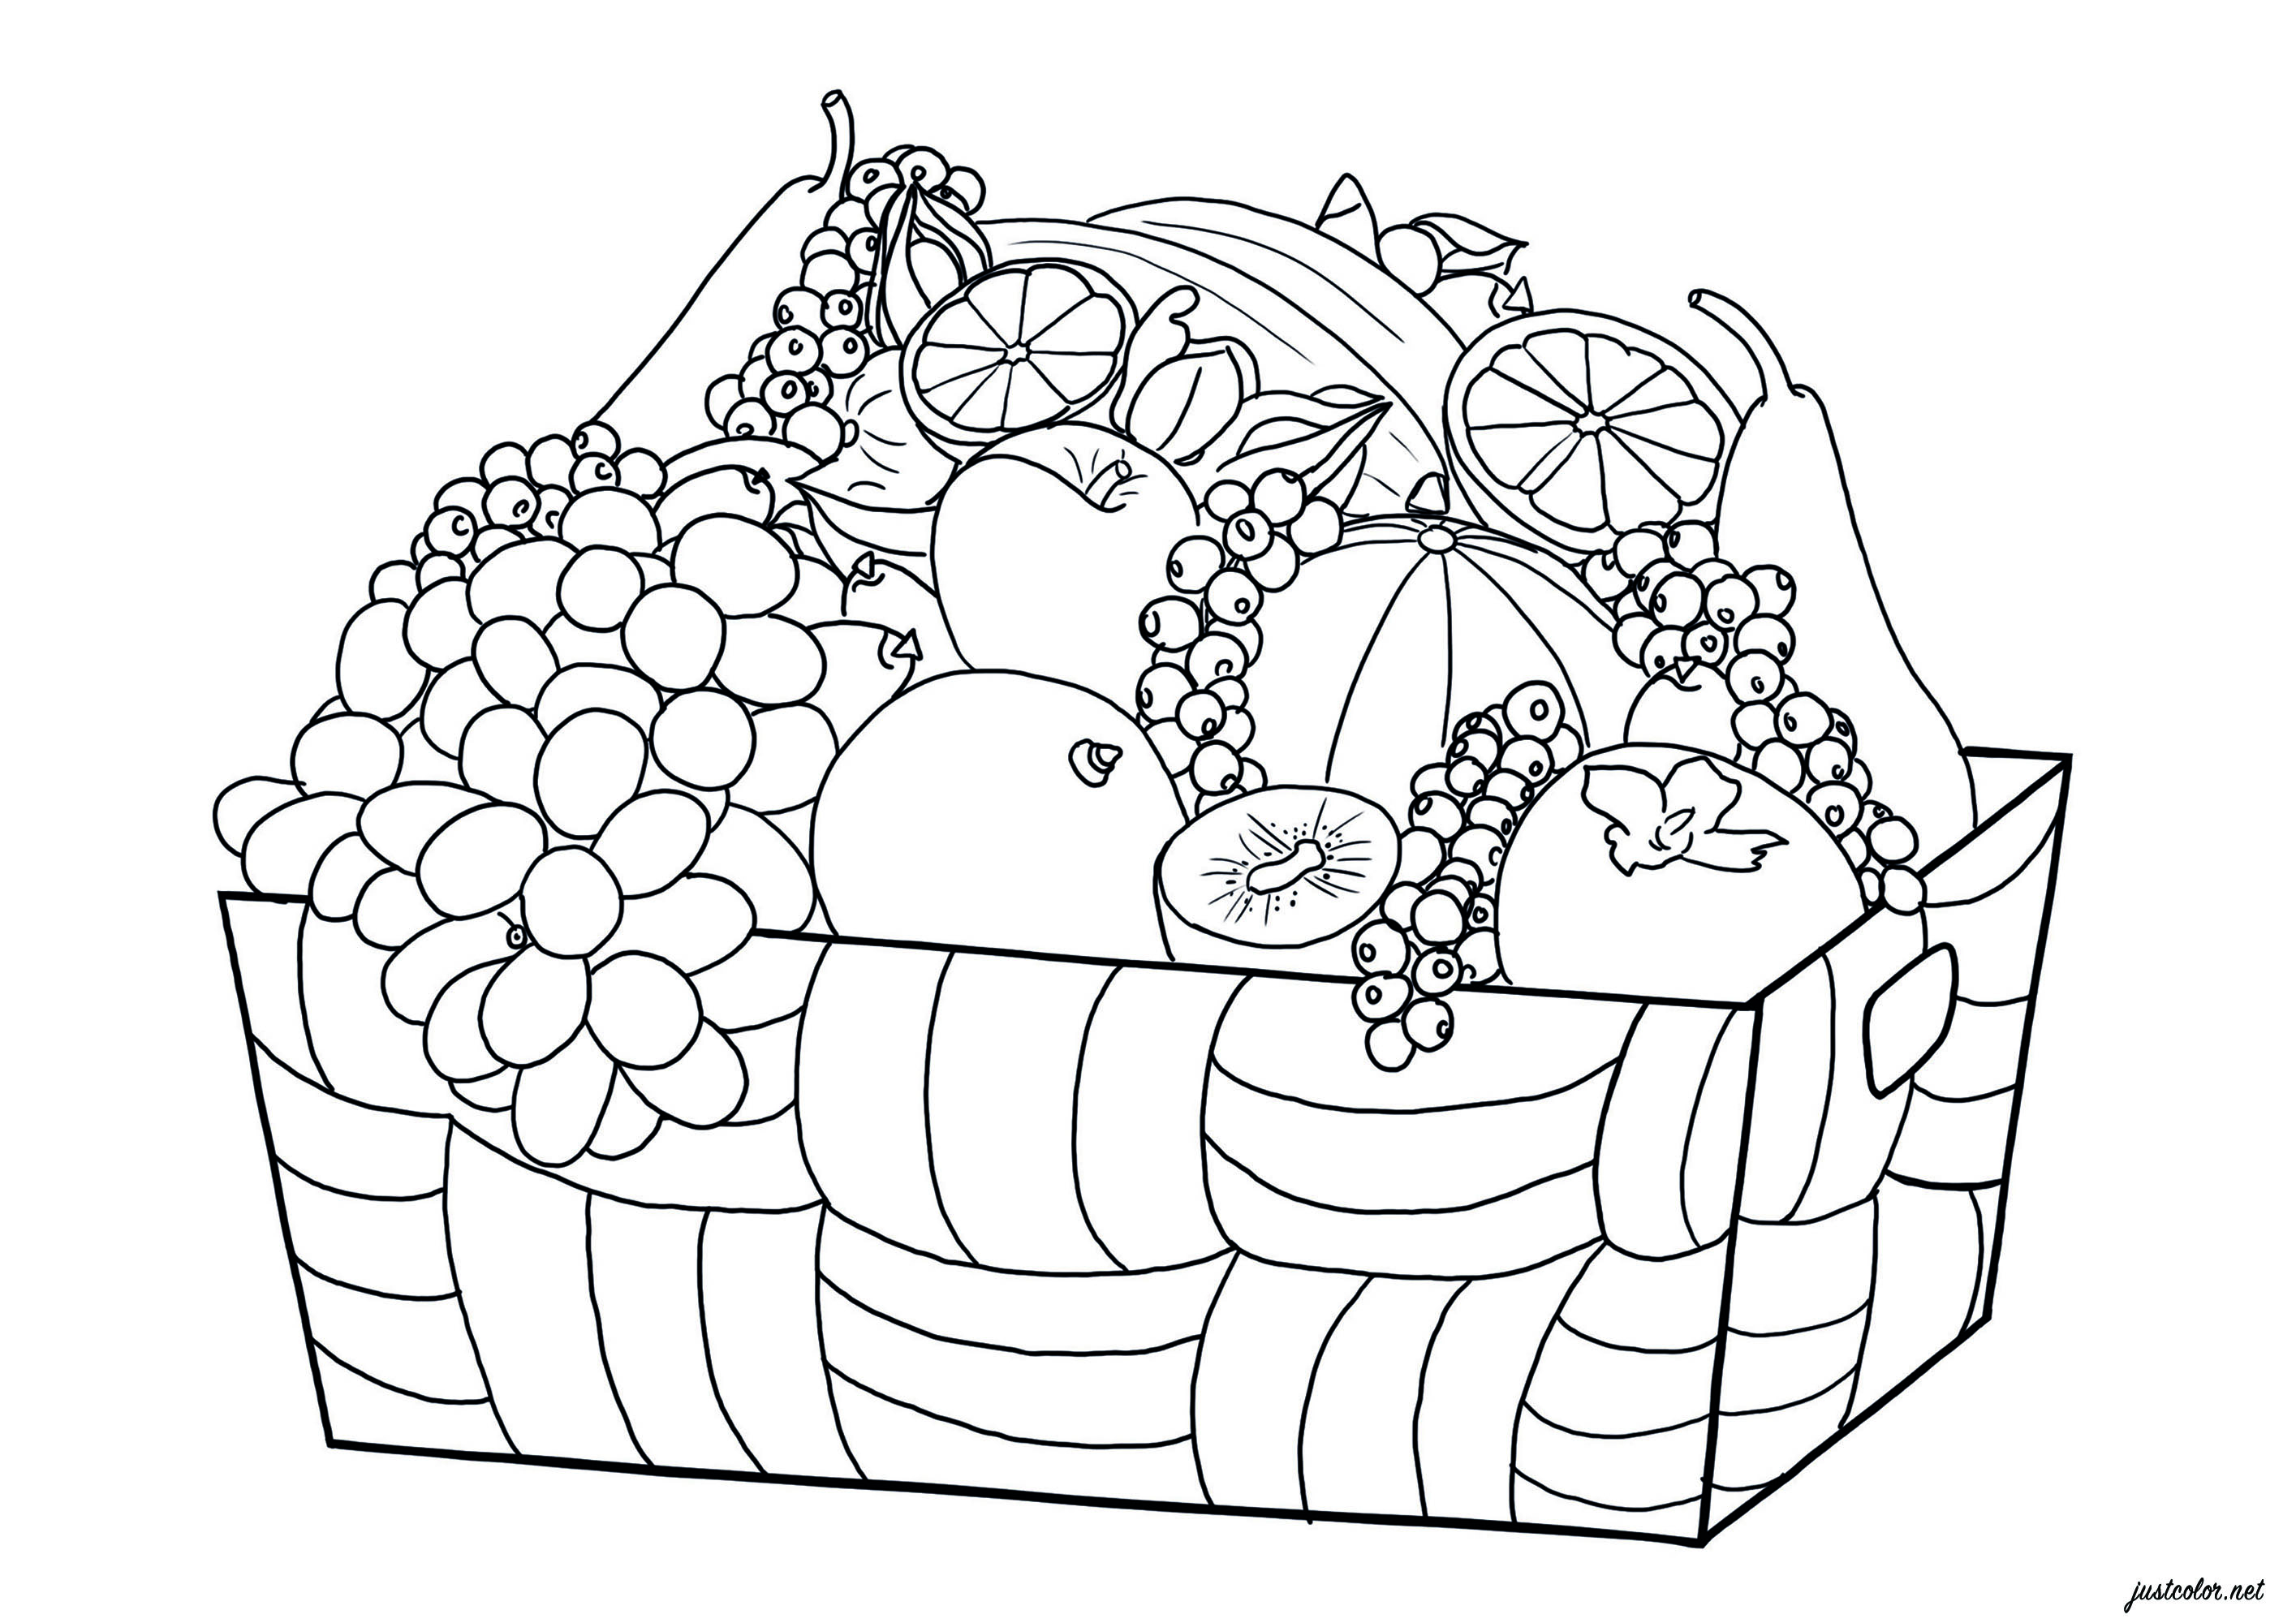 Basket Of Fruits - Flowers Adult Coloring Pages